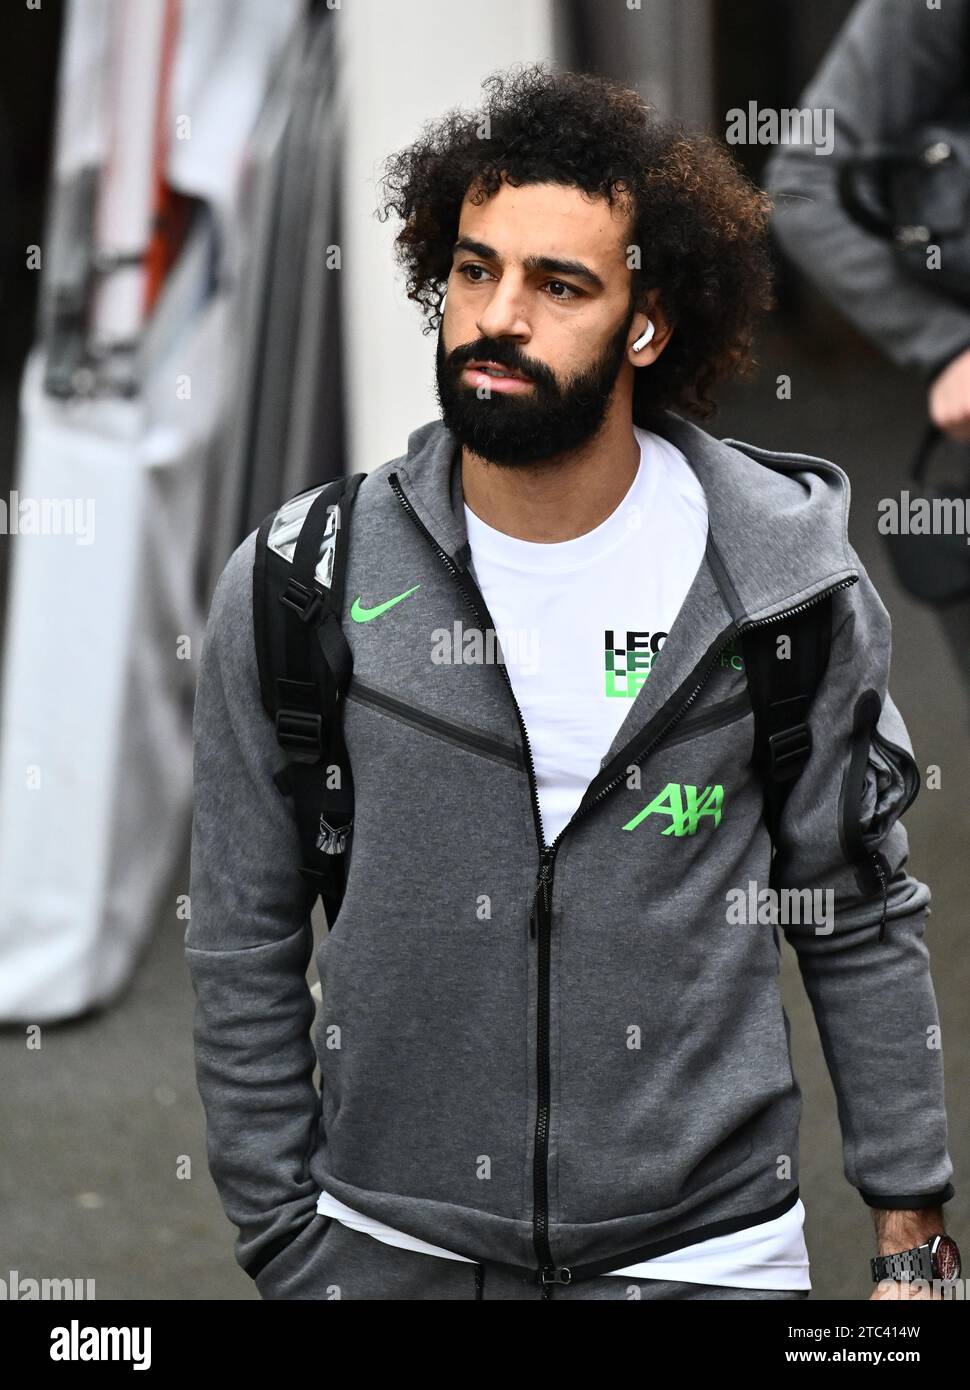 LONDON, ENGLAND - DECEMBER 9: Mohamed Salah of Liverpool FC with headphones during the Premier League match between Crystal Palace and Liverpool FC at Stock Photo